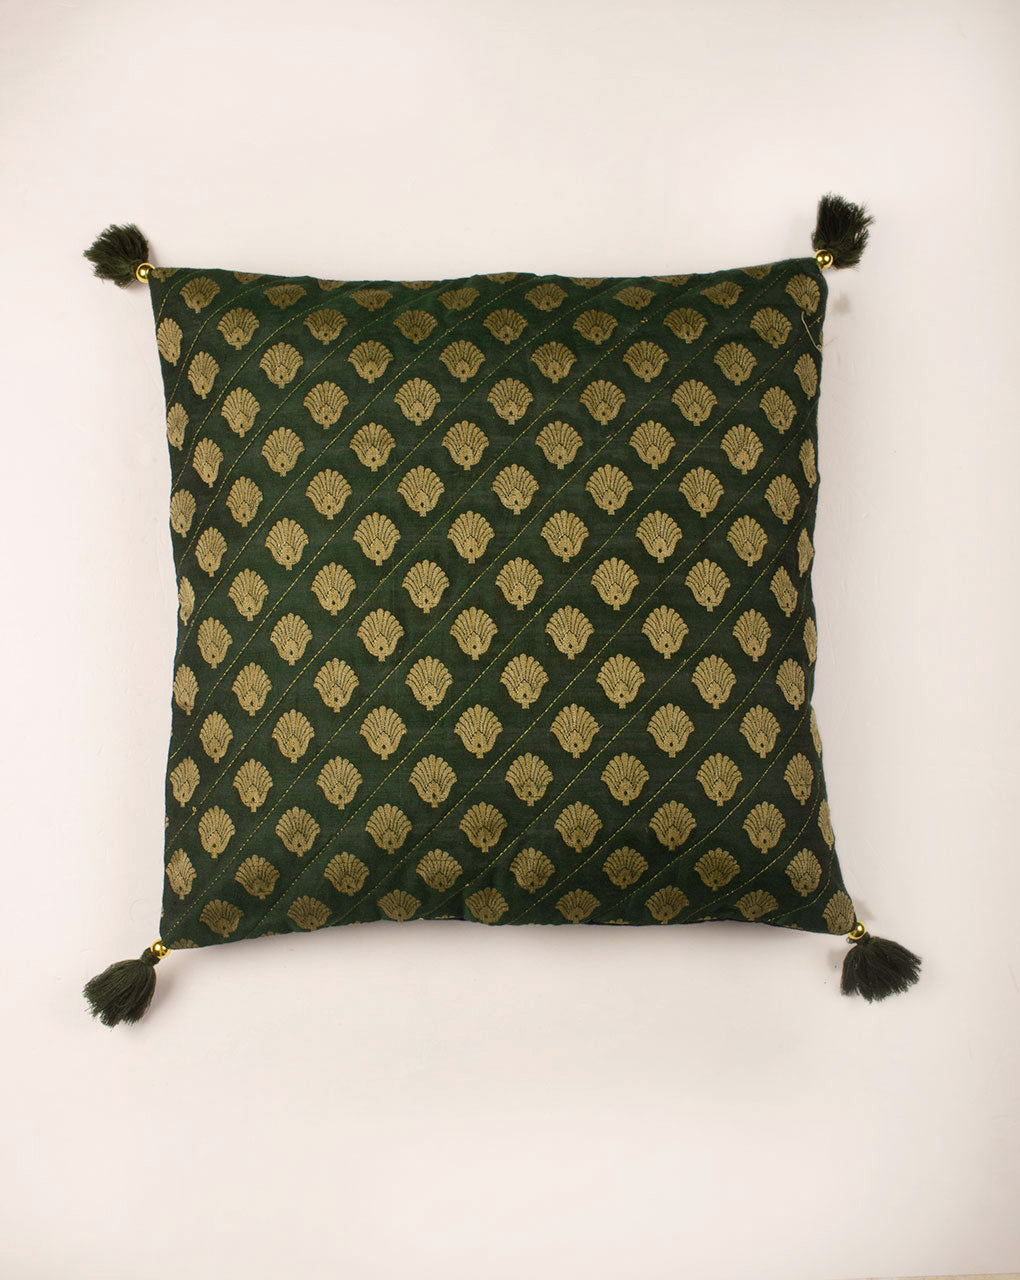 Hand Crafted JacquardChanderi Cushion Cover ( 16X16 Inches ) - Fabriclore.com